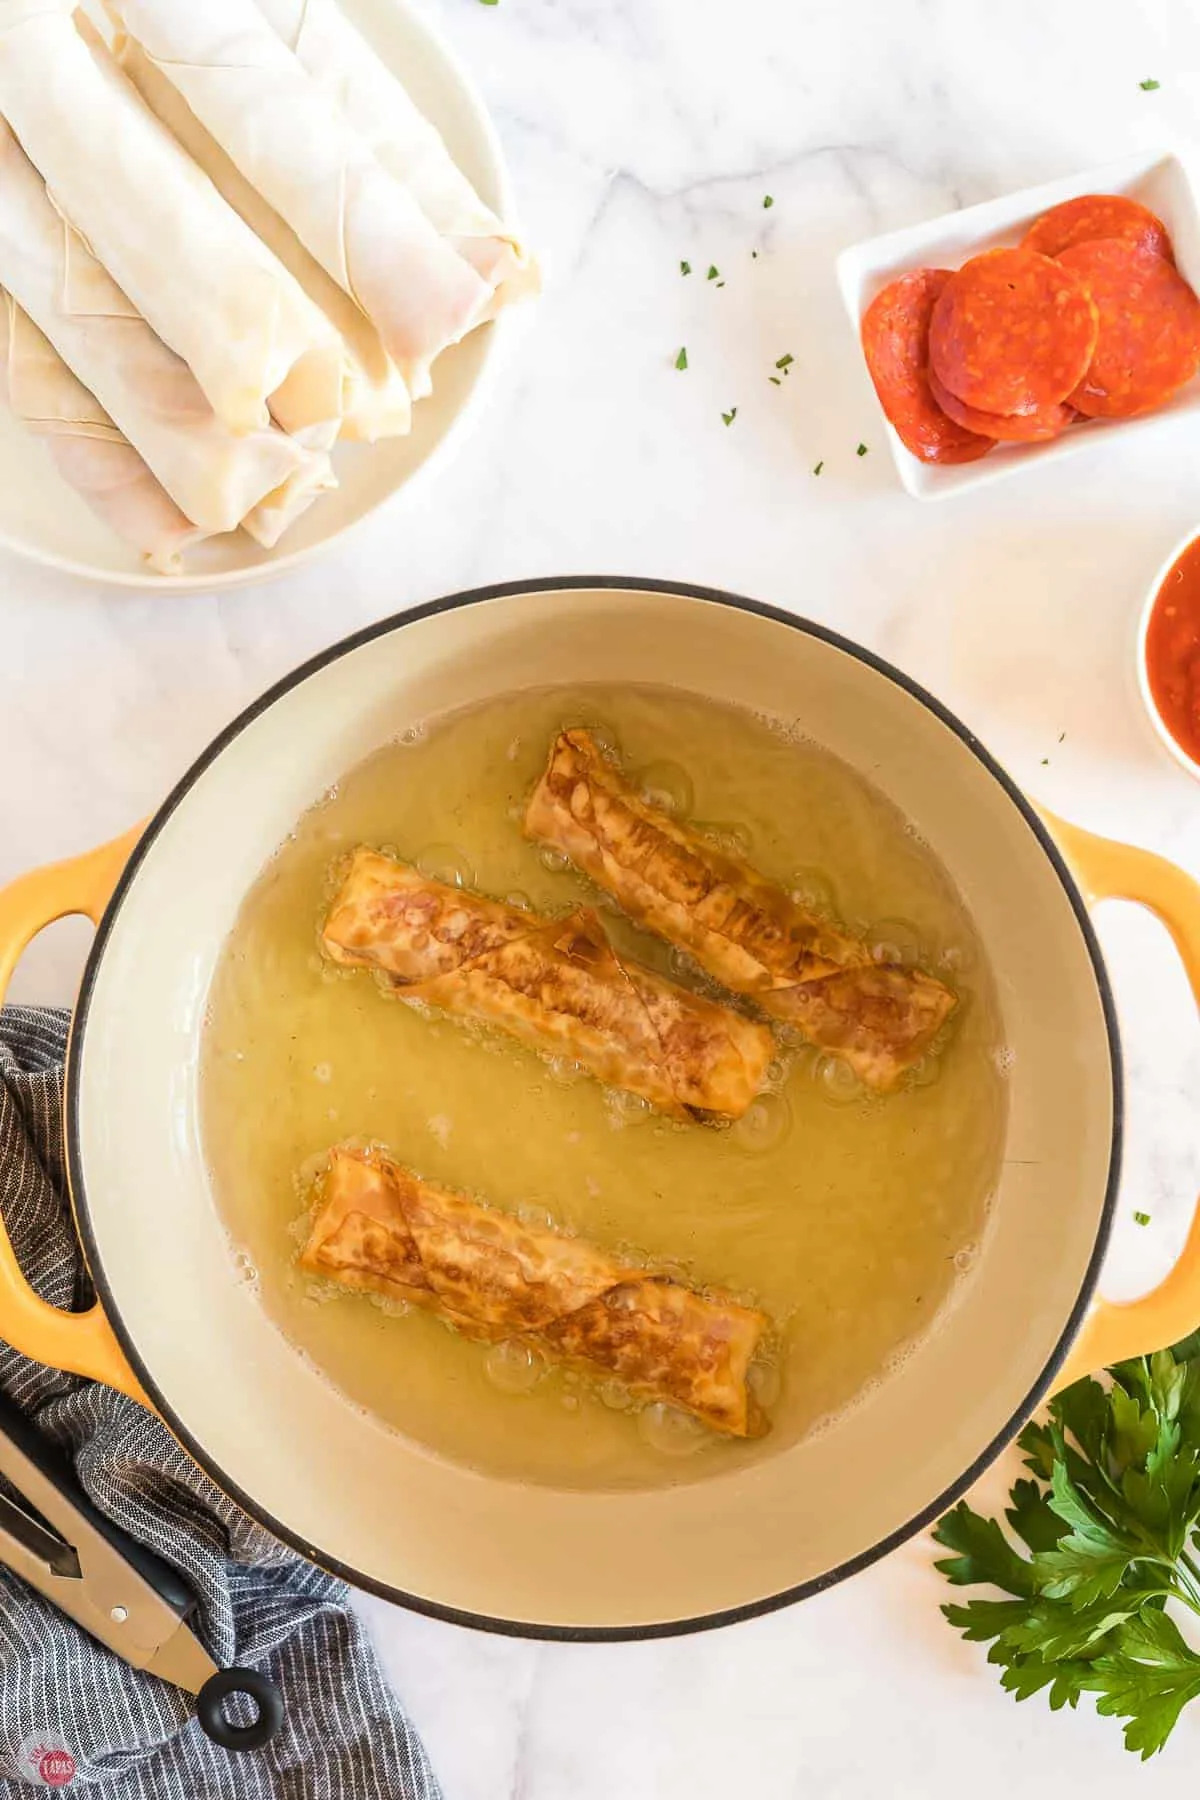 pizza egg rolls being fried in oil in a yellow pot